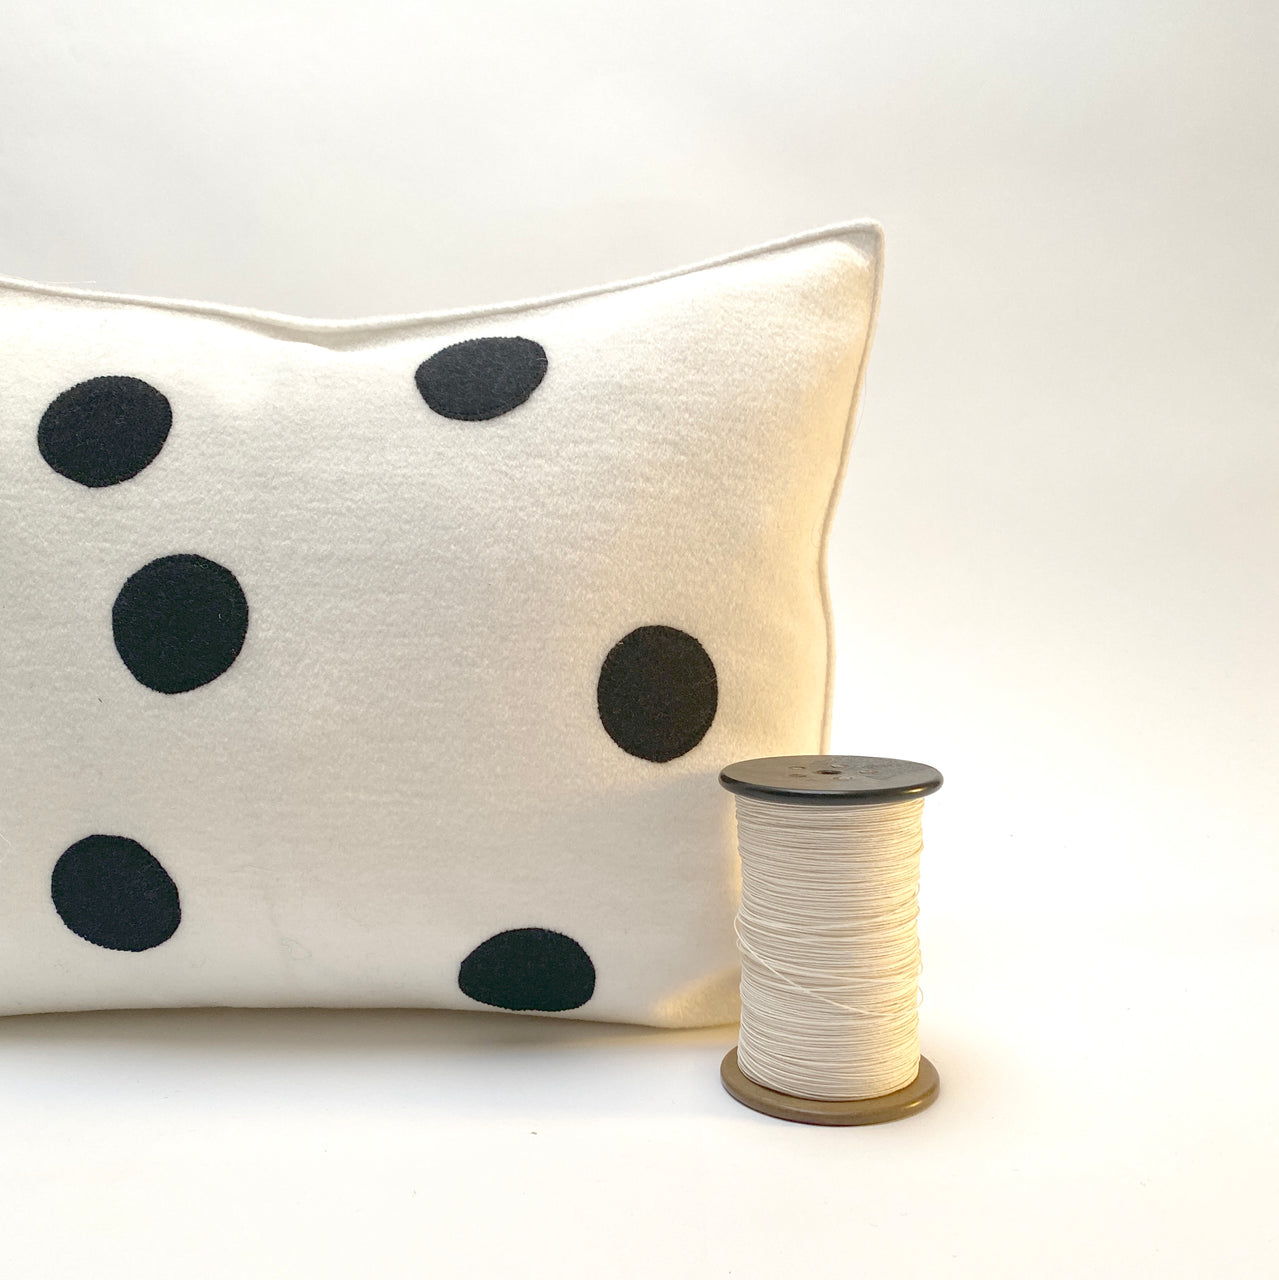 applique wool pillows. white and black dots